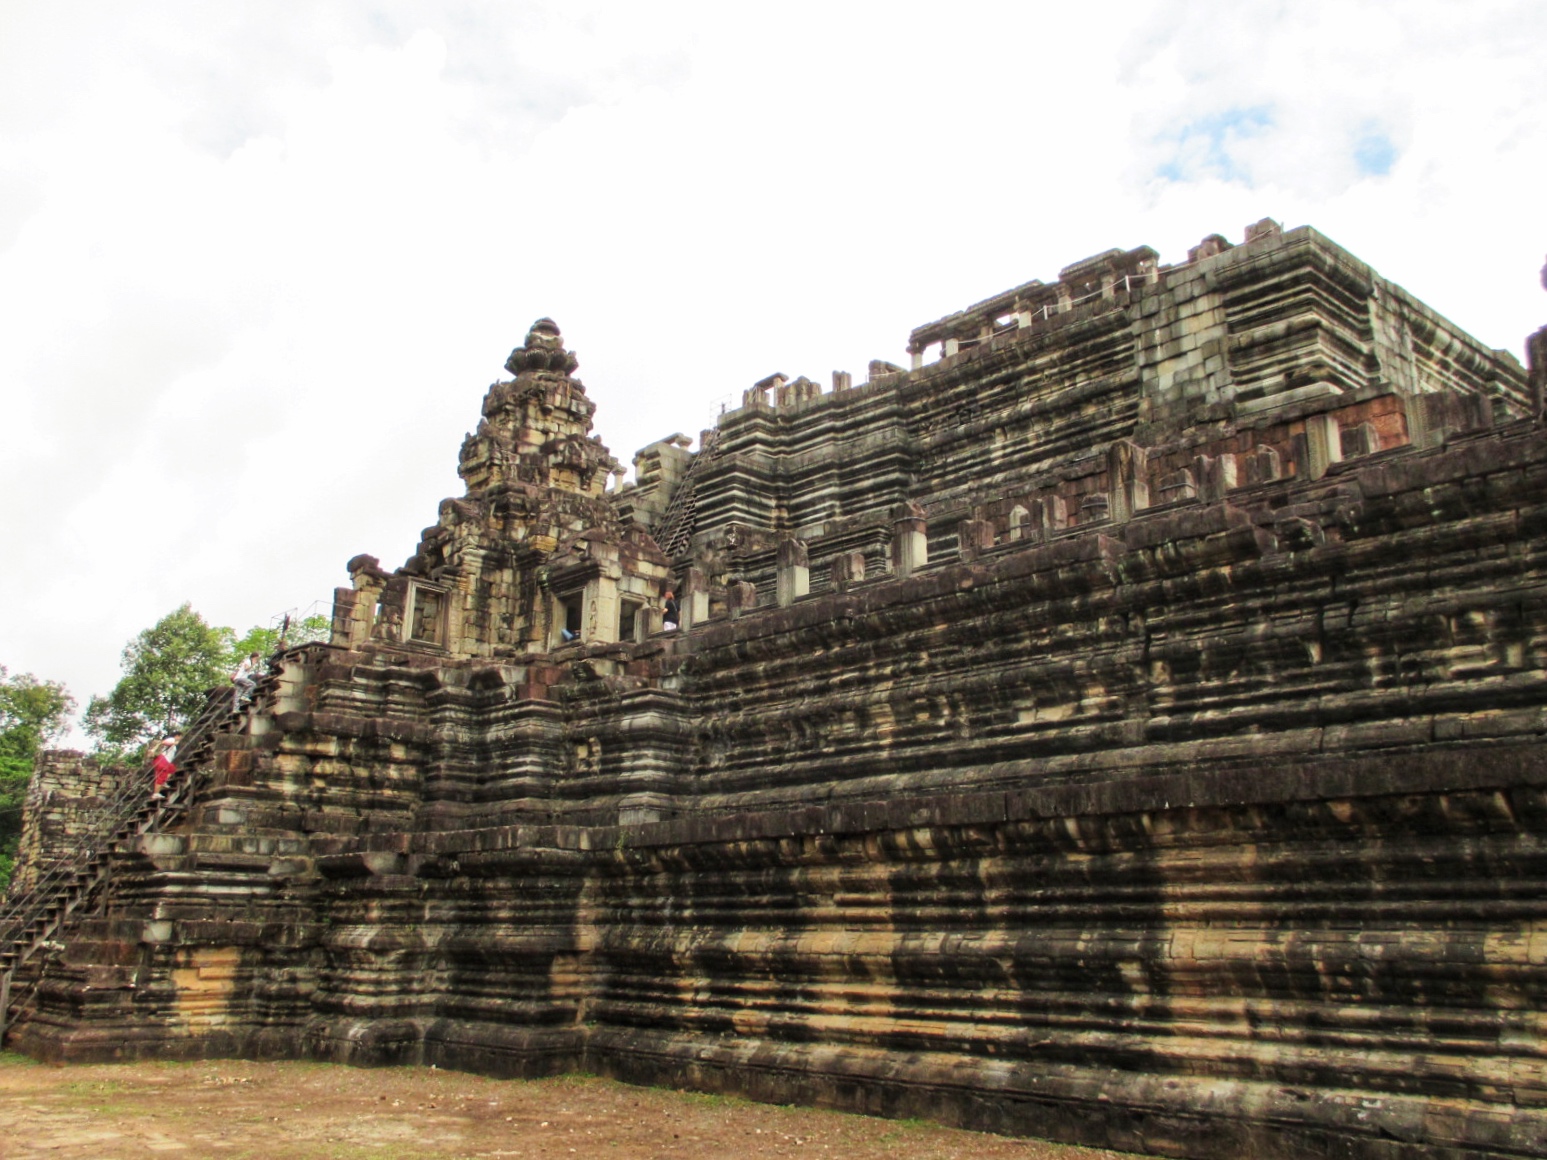 The symmetric structure of Baphoun temple in Siem Reap Cambodia